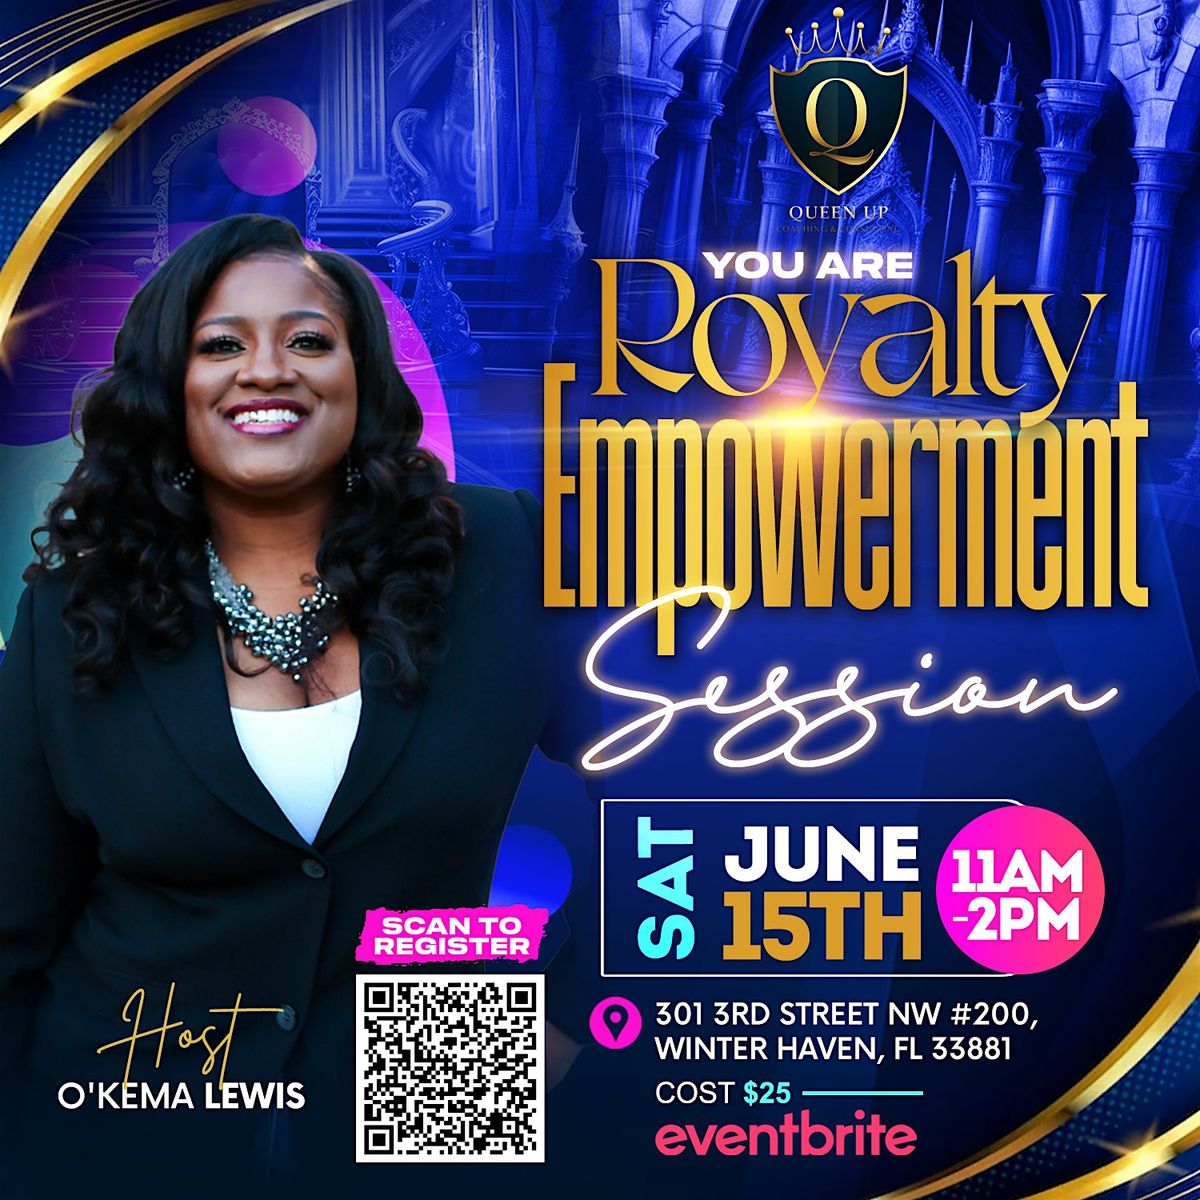 YOU ARE ROYALTY EMPOWERMENT SESSION